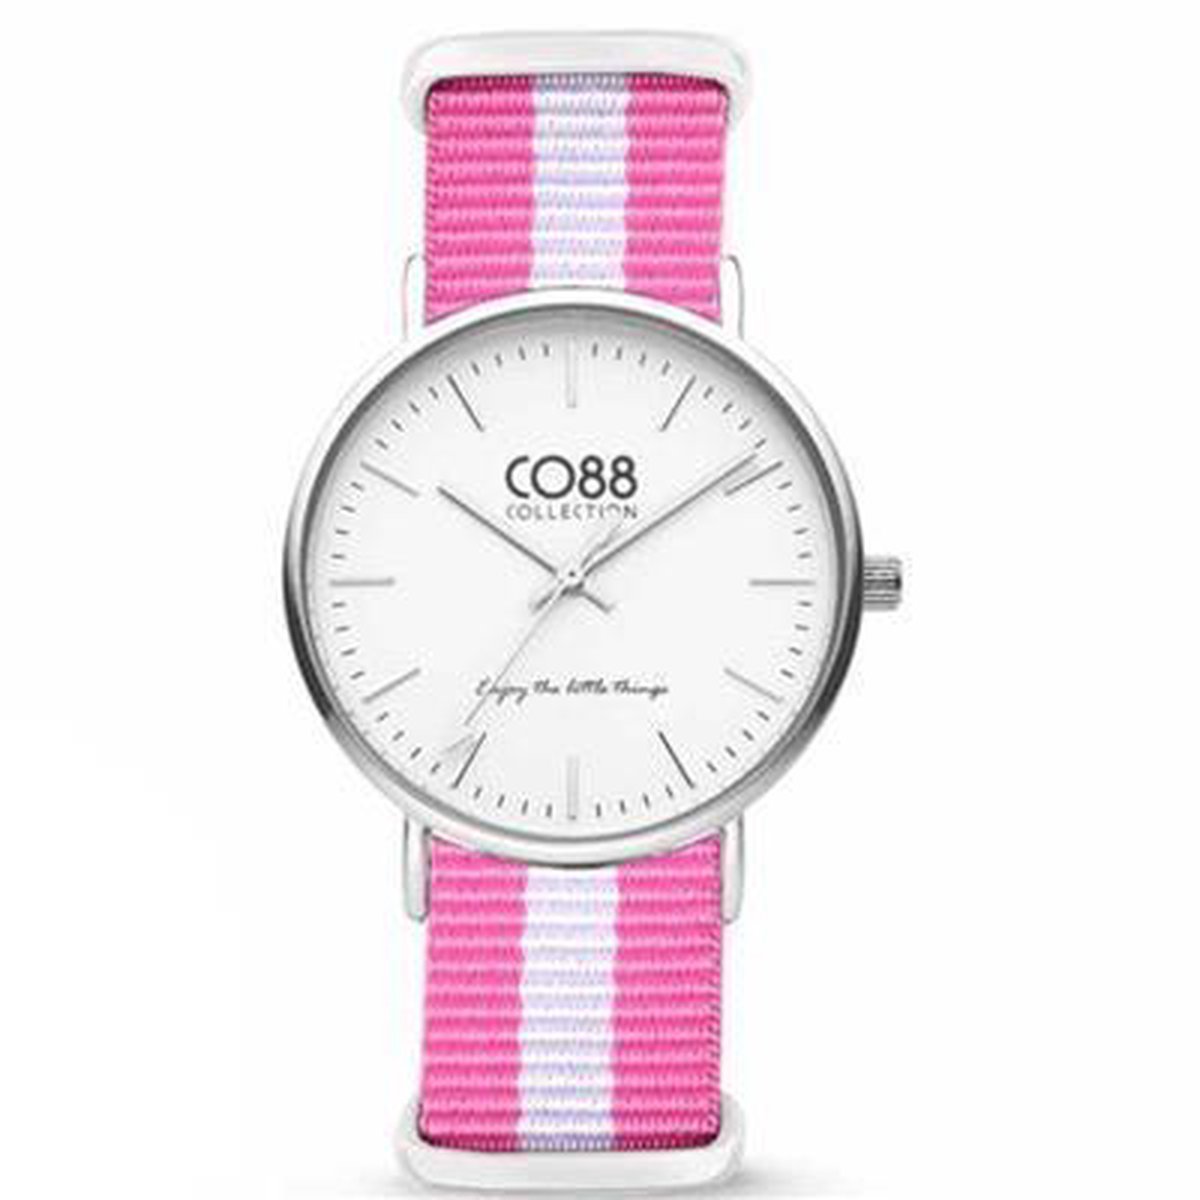 CO88 Collection Watches 8CW 10025 Horloge - Nato Band - Ø 36 mm - Roze - Wit